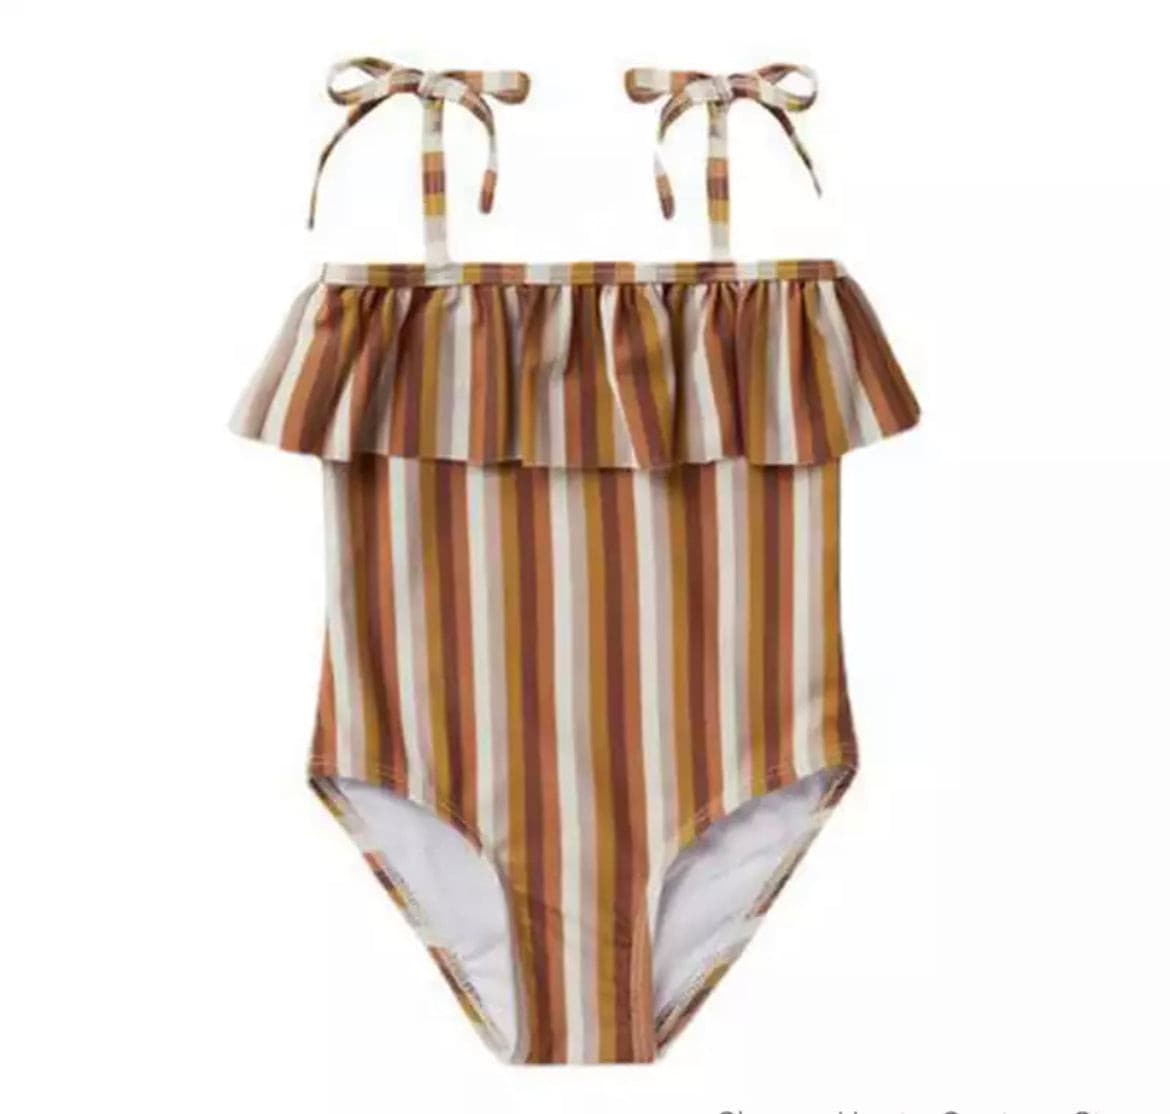 Girls Swimsuit , Stripes + Frills, from 12 months-12 years.